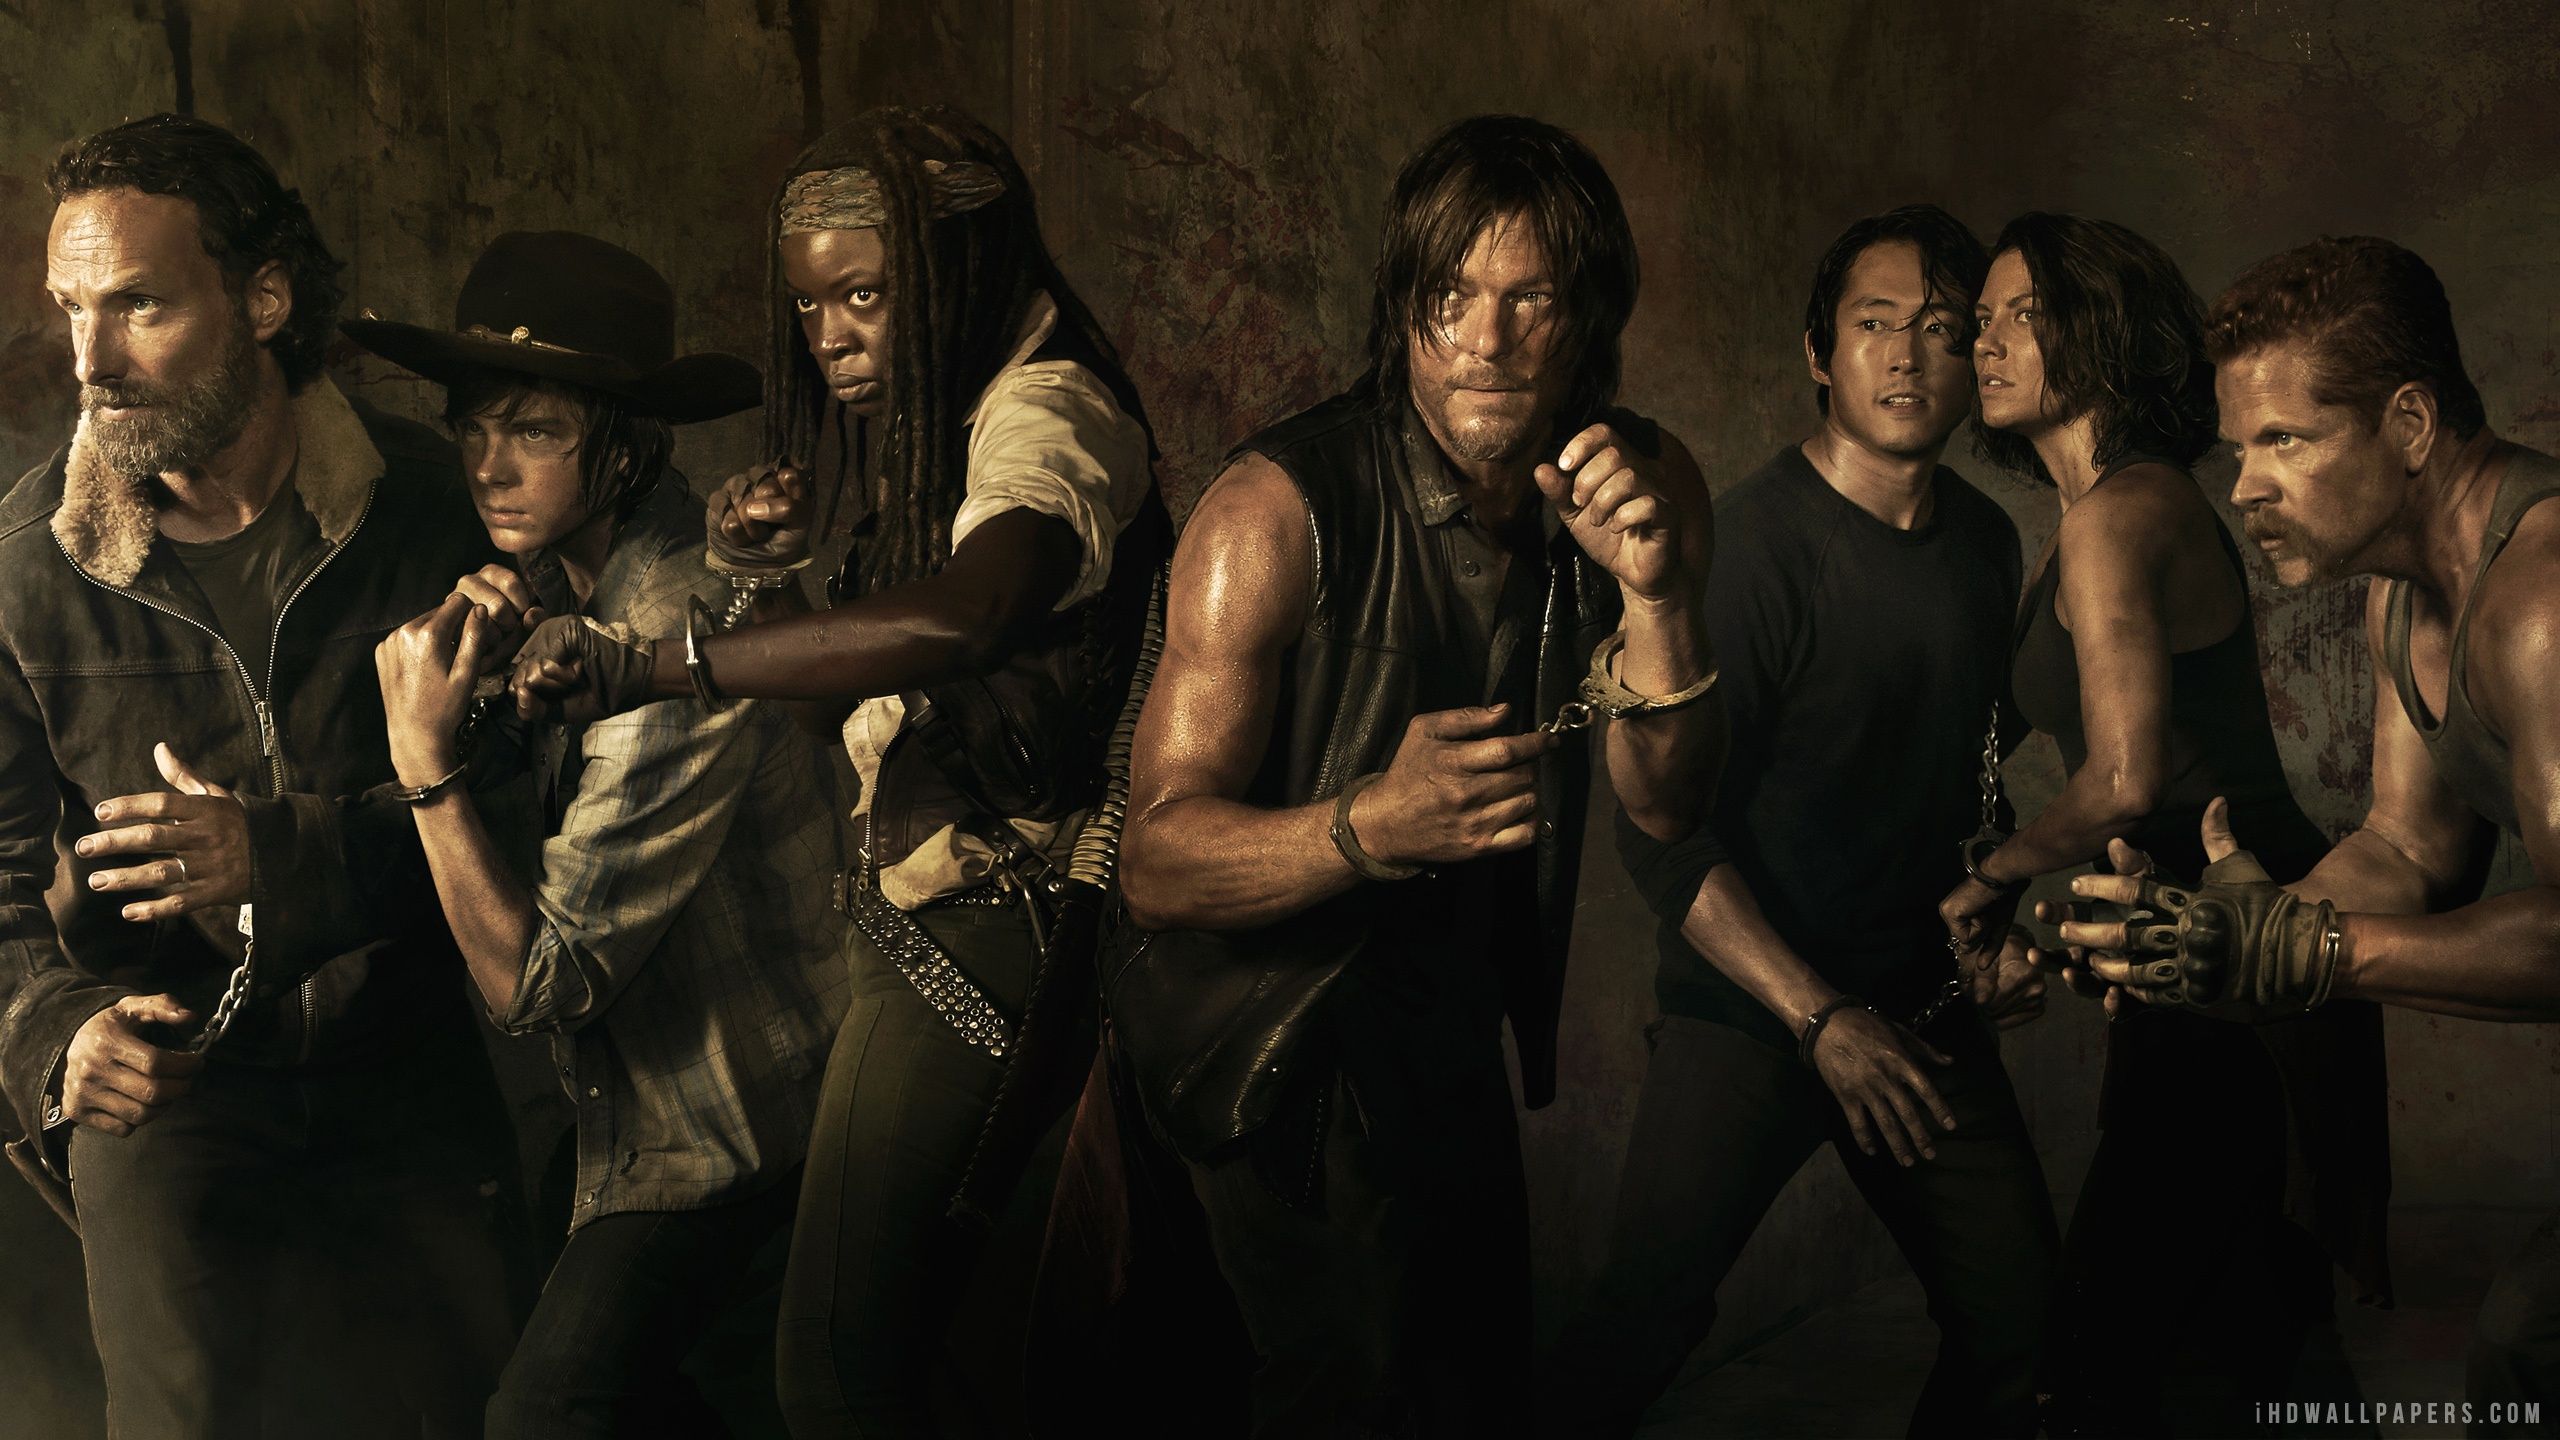 Walking dead Wallpapers High Resolution and Quality Download